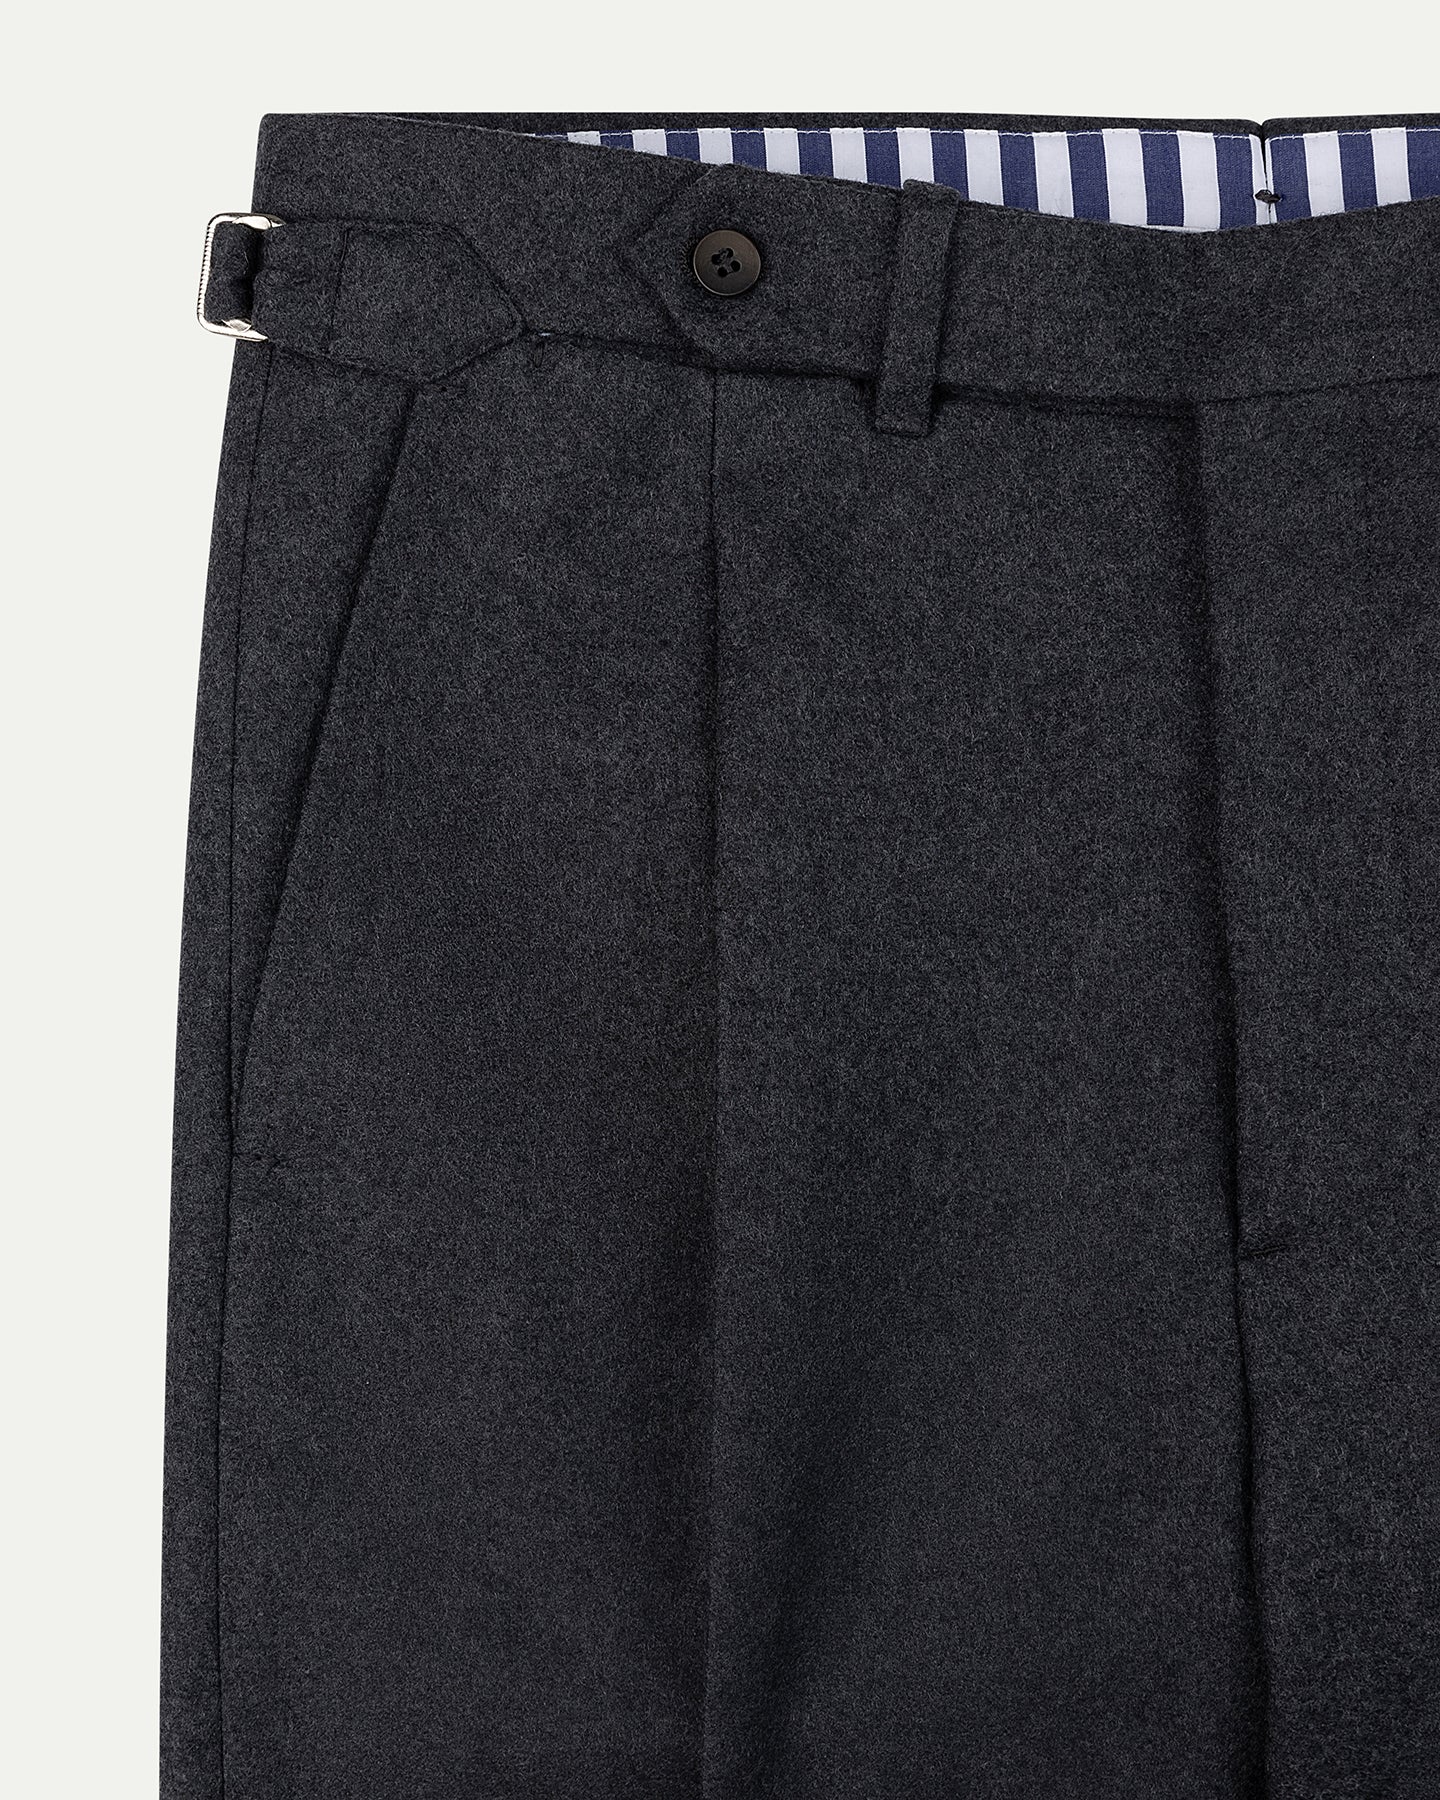 Made-To-Order Trousers in Dark Grey Flannel